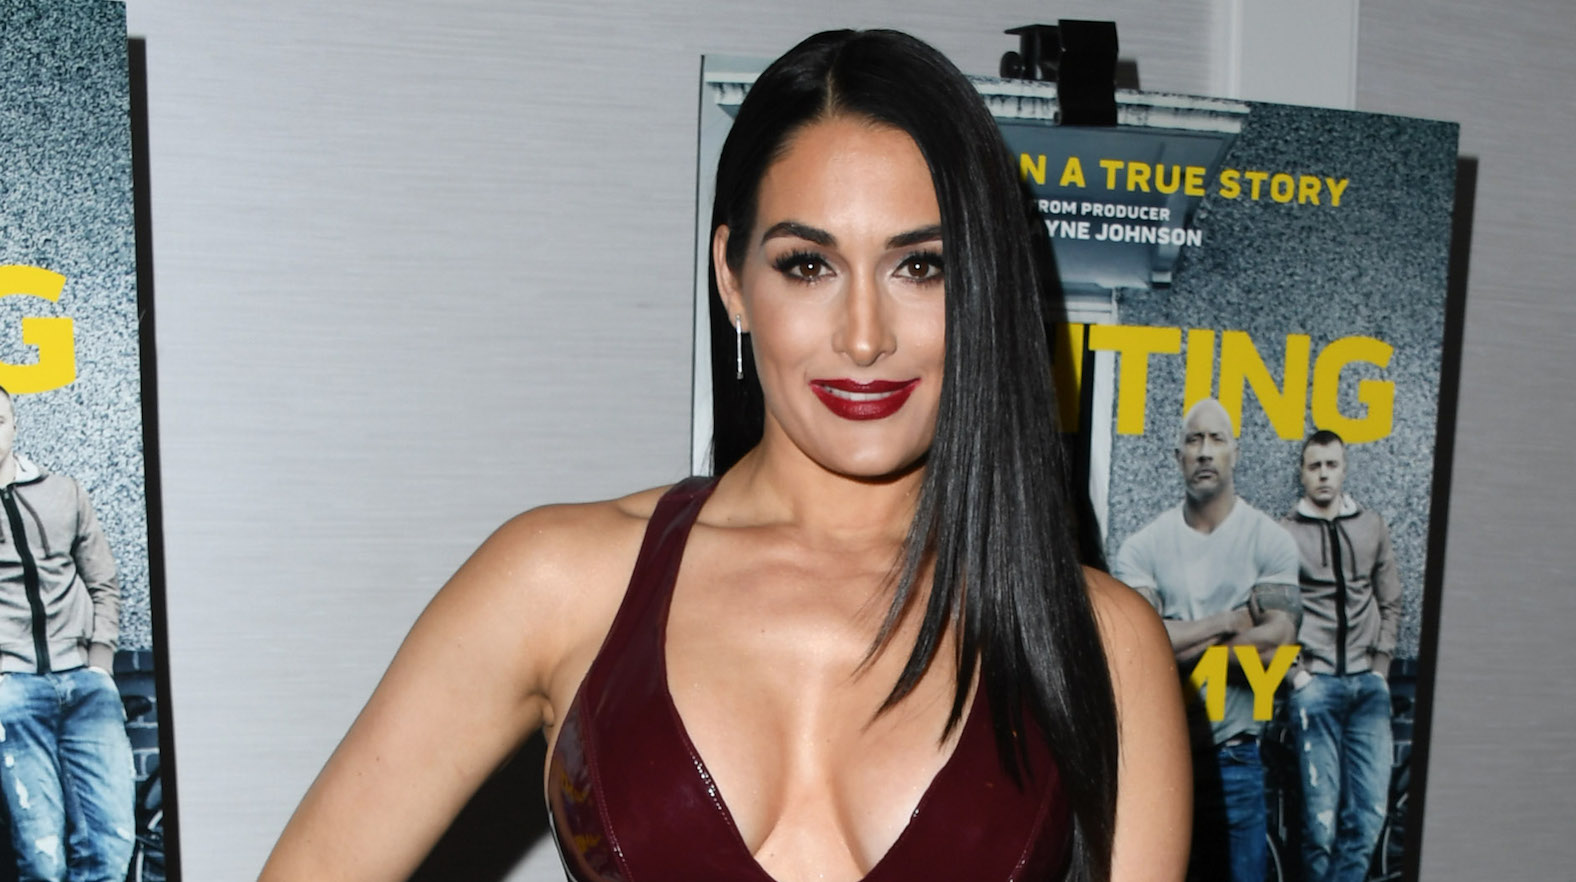 WWE's Nikki Bella Says Brain Cyst Is 'Super Scary,' But It's